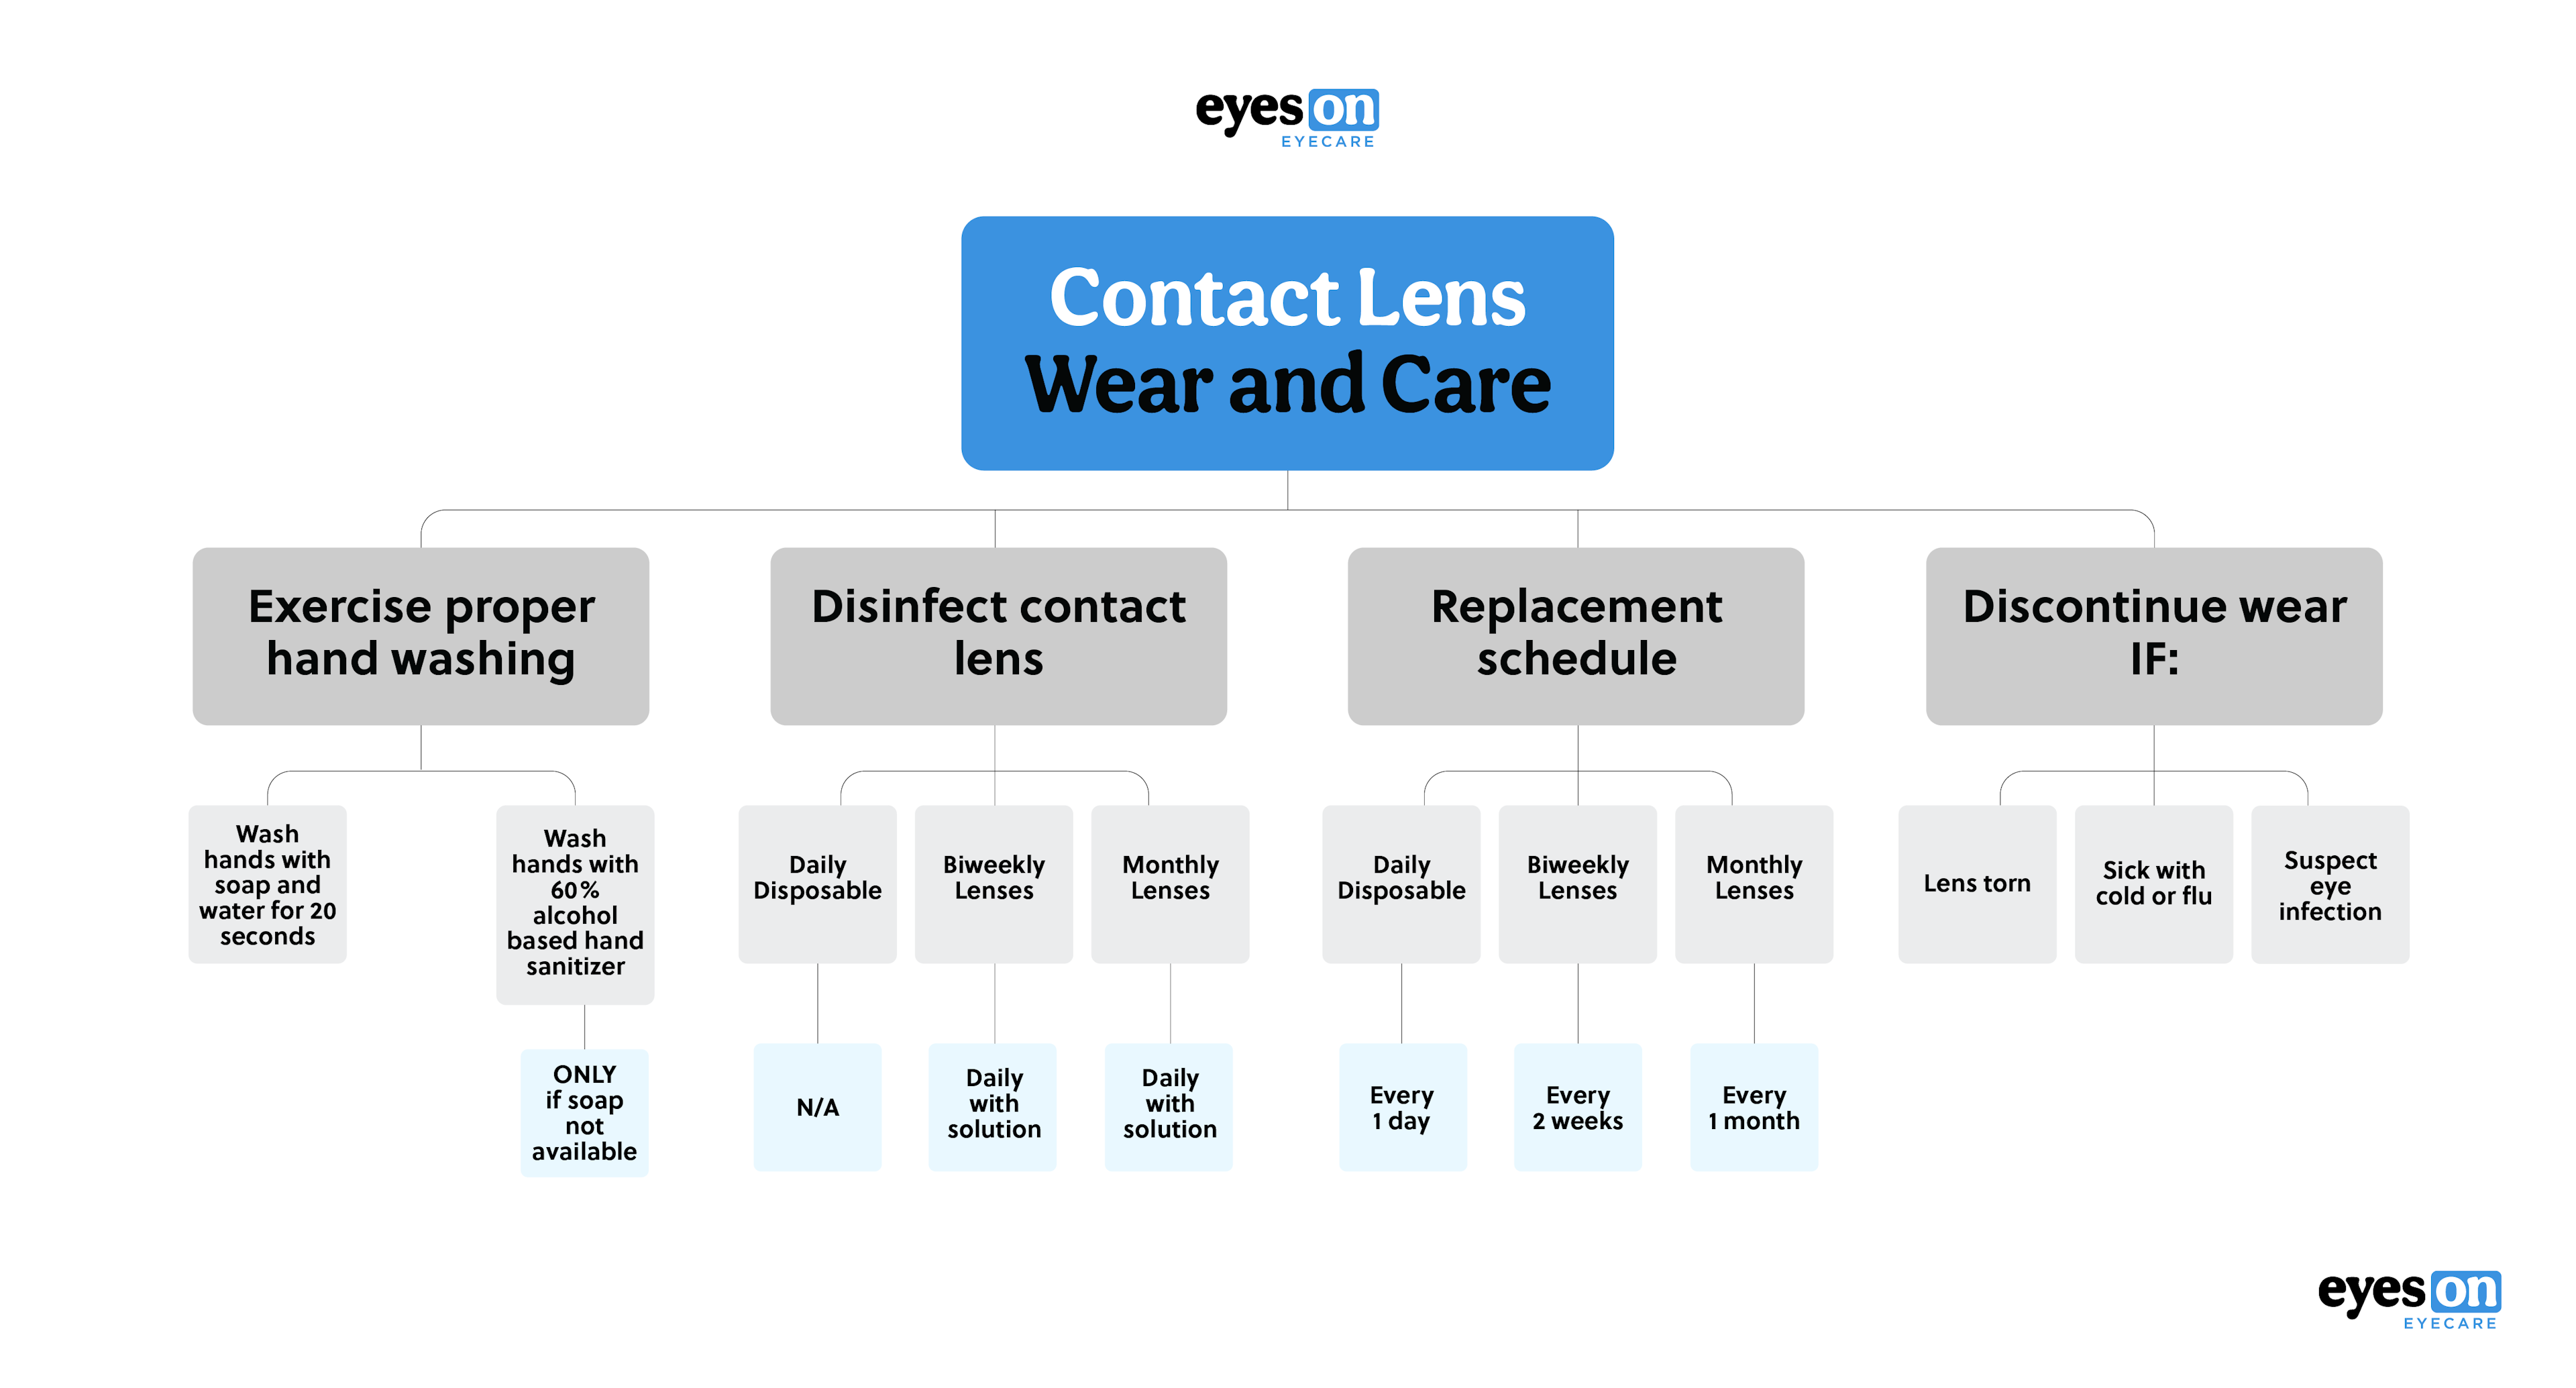 https://covalentcareers3.s3.amazonaws.com/media/original_images/contact-lens-wear-and-care-01.png